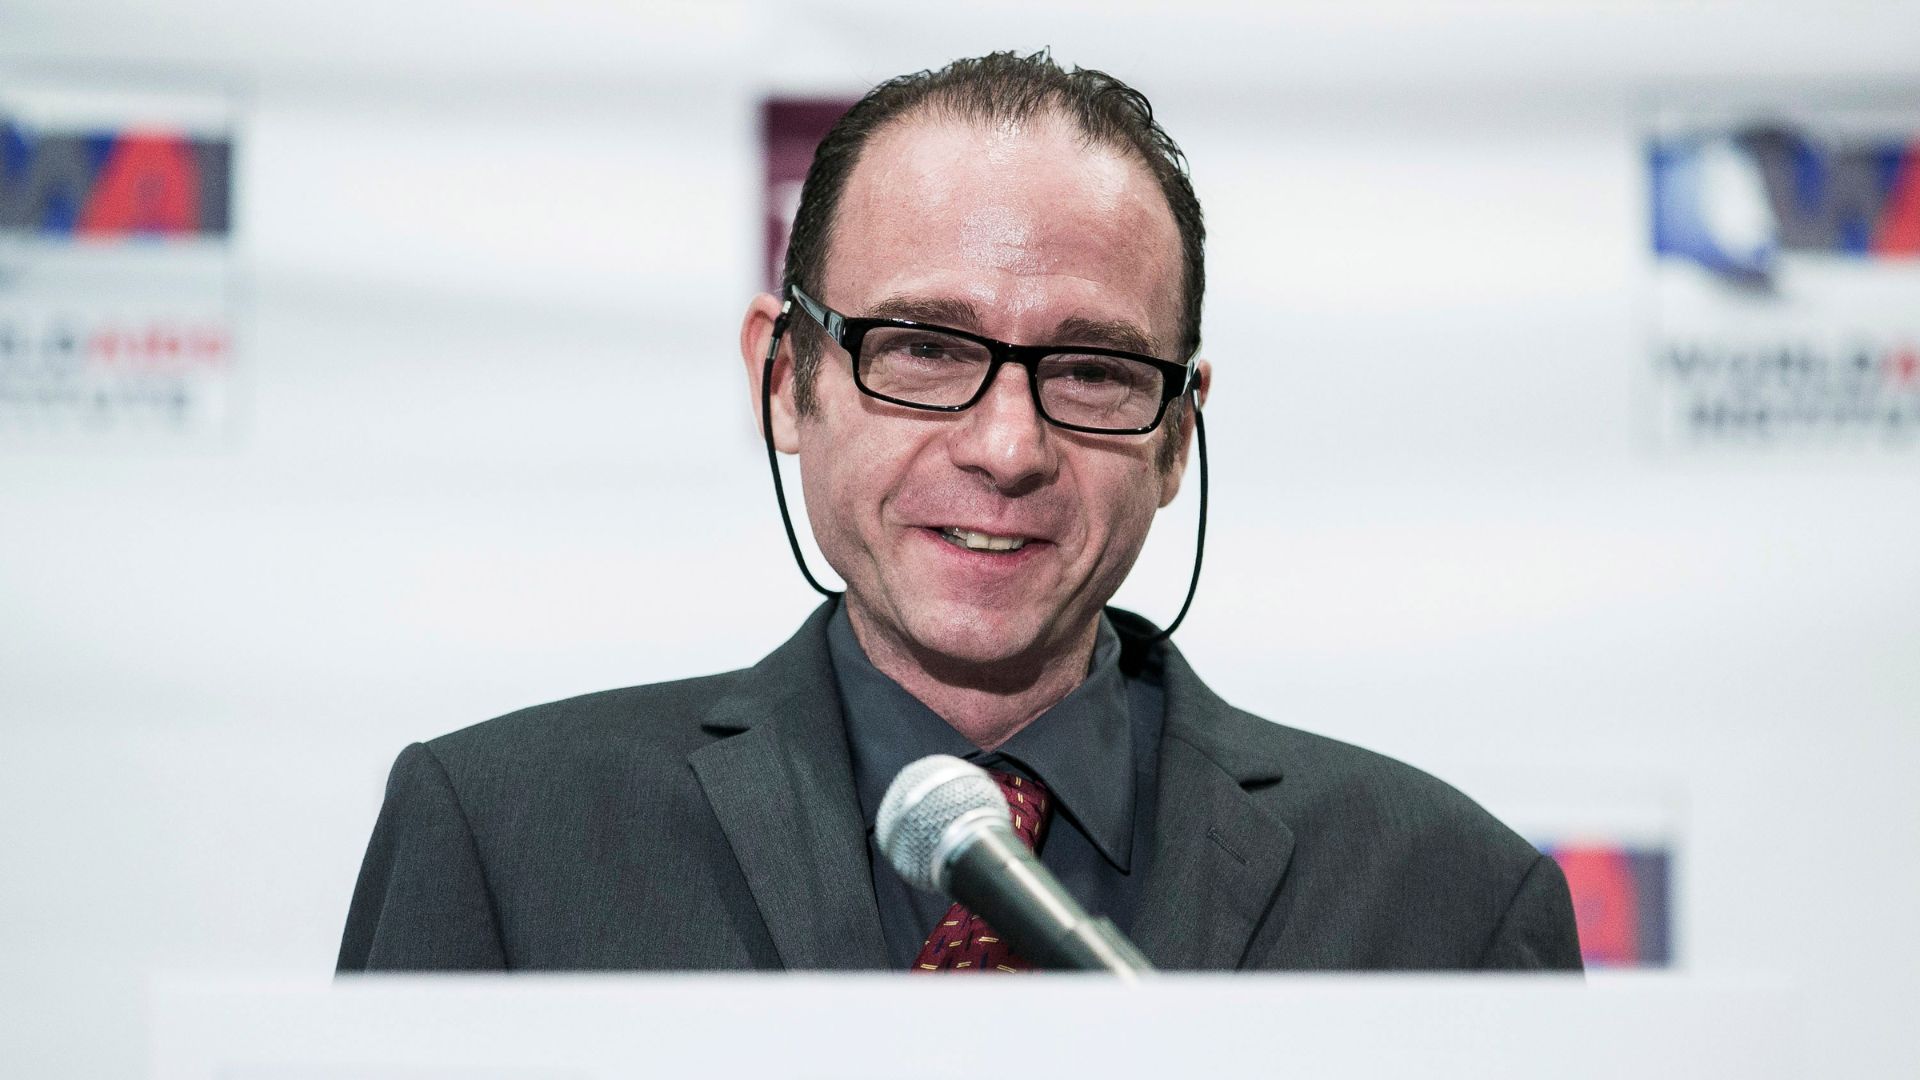 photo shows a white man with short brown hair wearing rimmed glasses and a dark suit as he smiles behind a podium